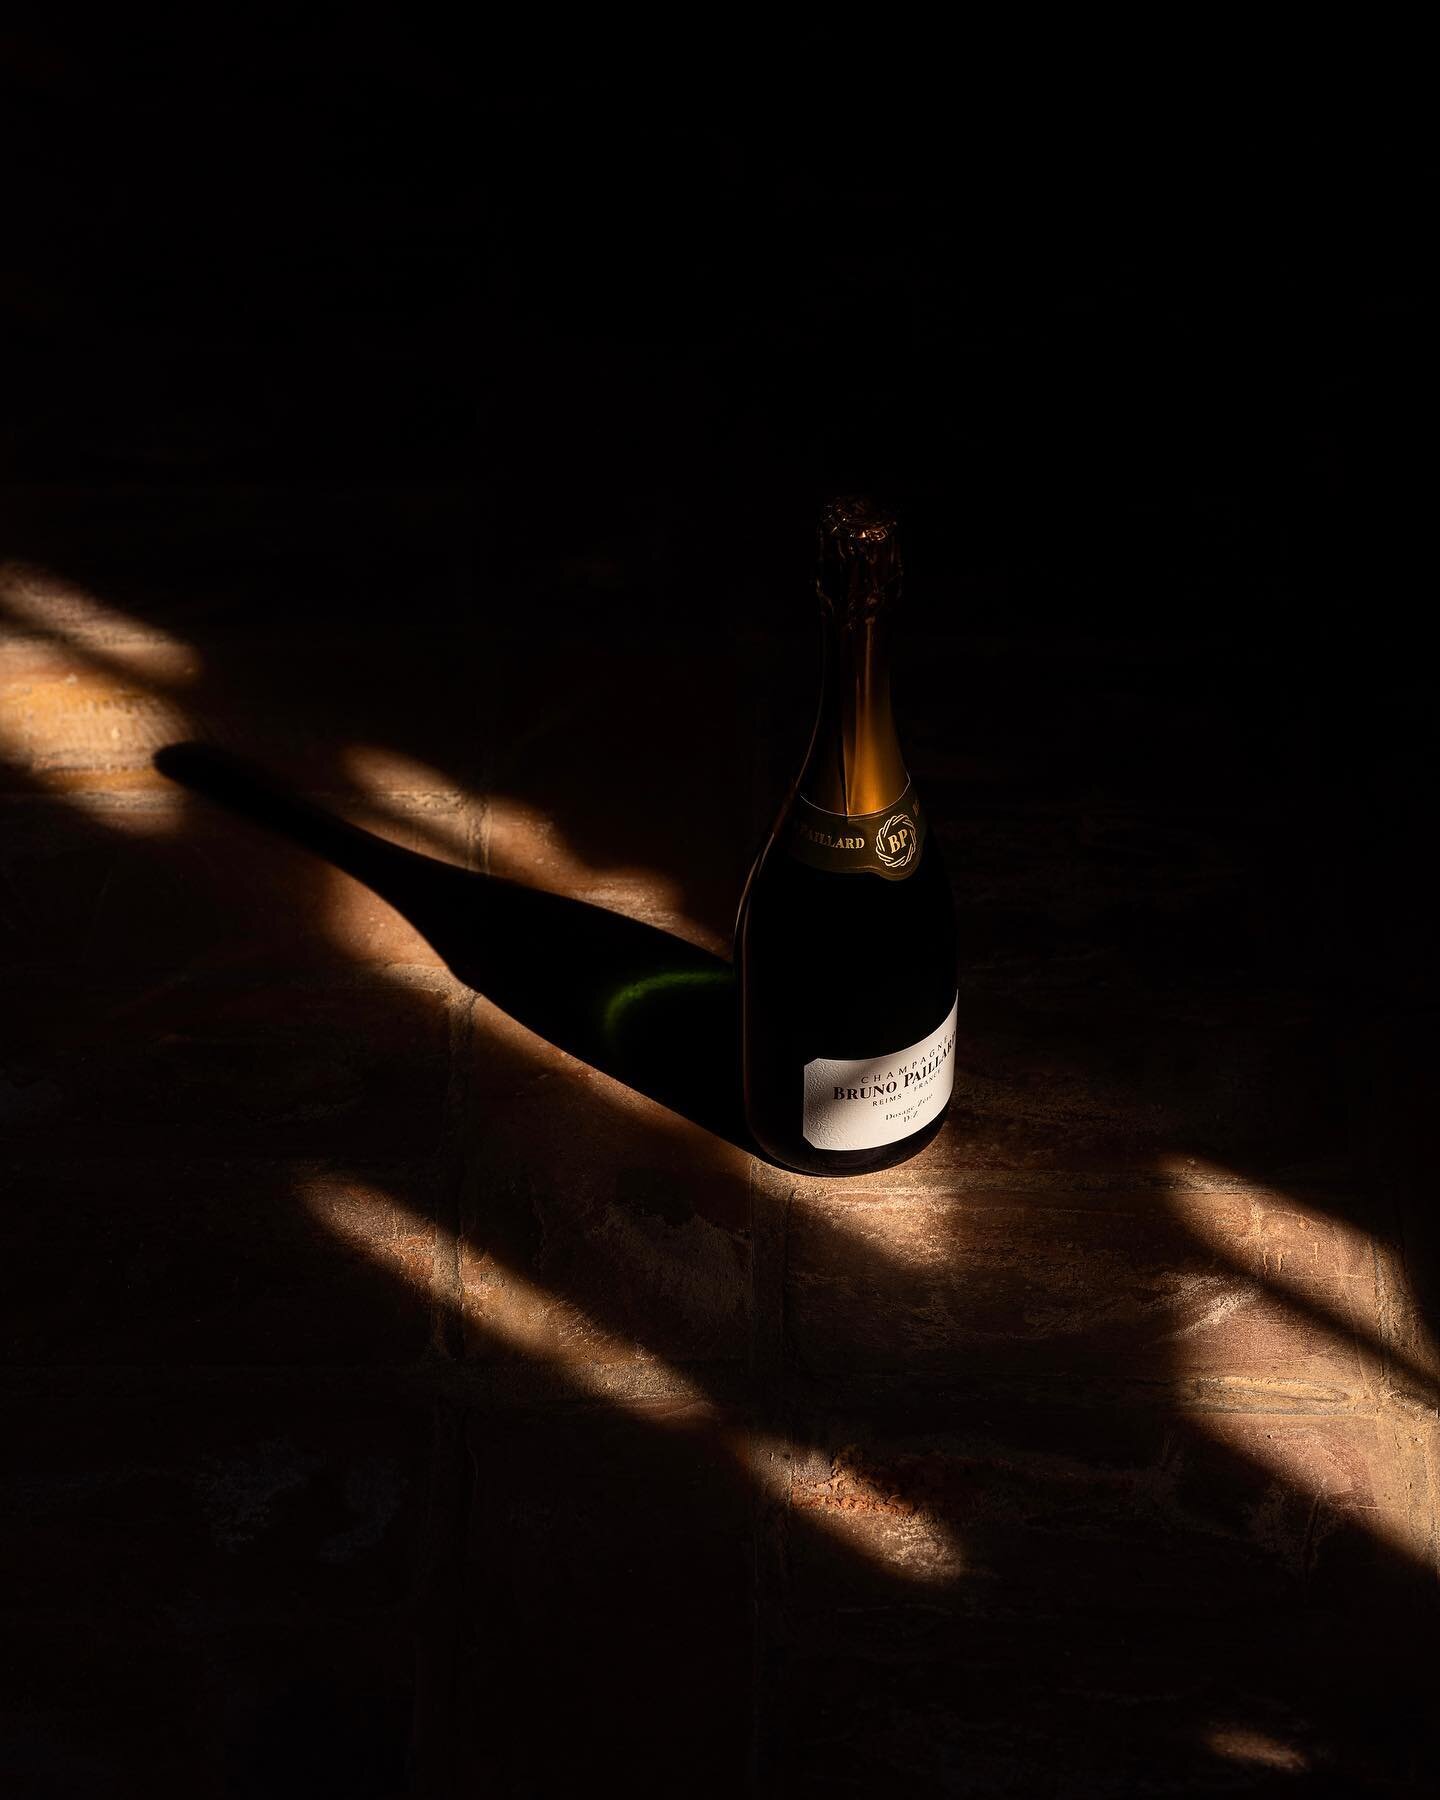 A photographic ode to the bottles of @champagnebrunopaillard 🍇

So excited to share some of my favorite stills for Bruno Paillard. 

Diane and Alice, thank you again for the trust and creative freedom. 

#brunopaillard #champagne